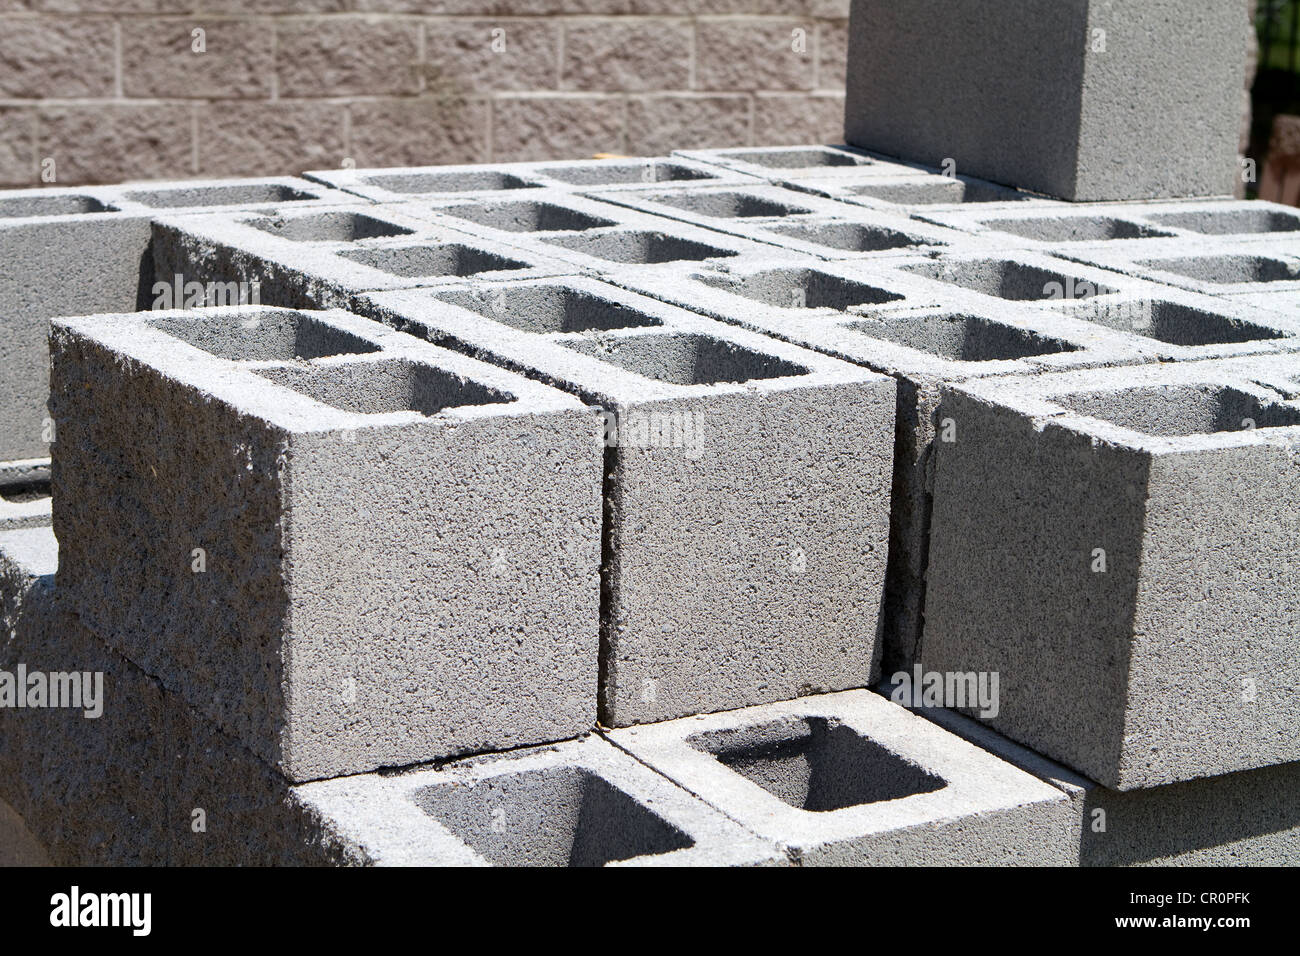 Architectural concrete blocks stacked at a construction site. Stock Photo